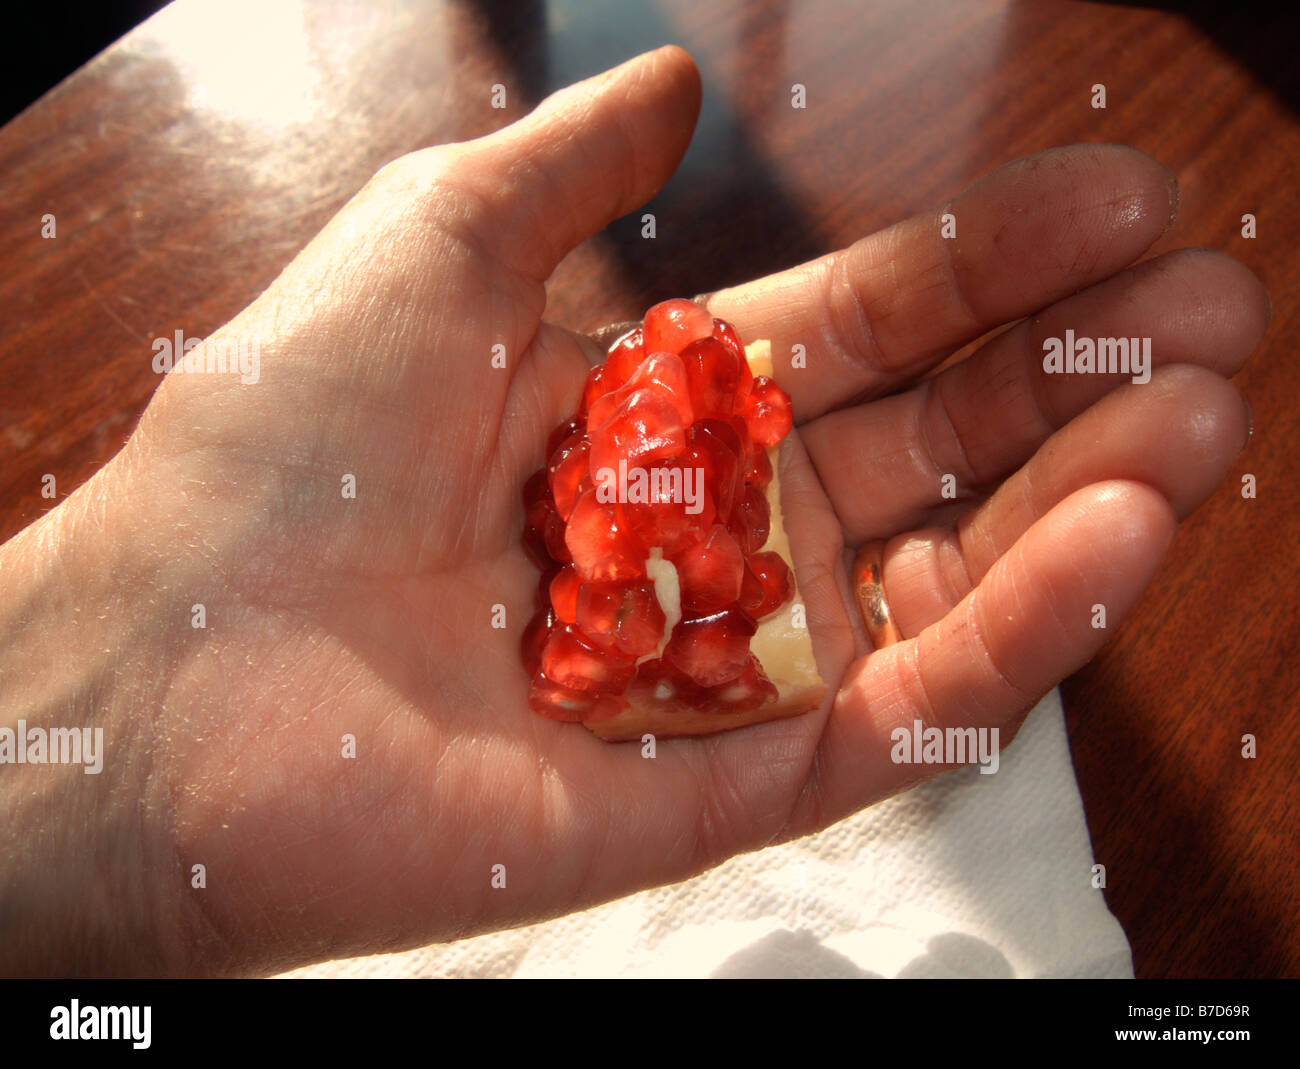 Close-up of a hand holding a piece of pomegranate (Punica granatum) and detail of pomegranates arils. Stock Photo